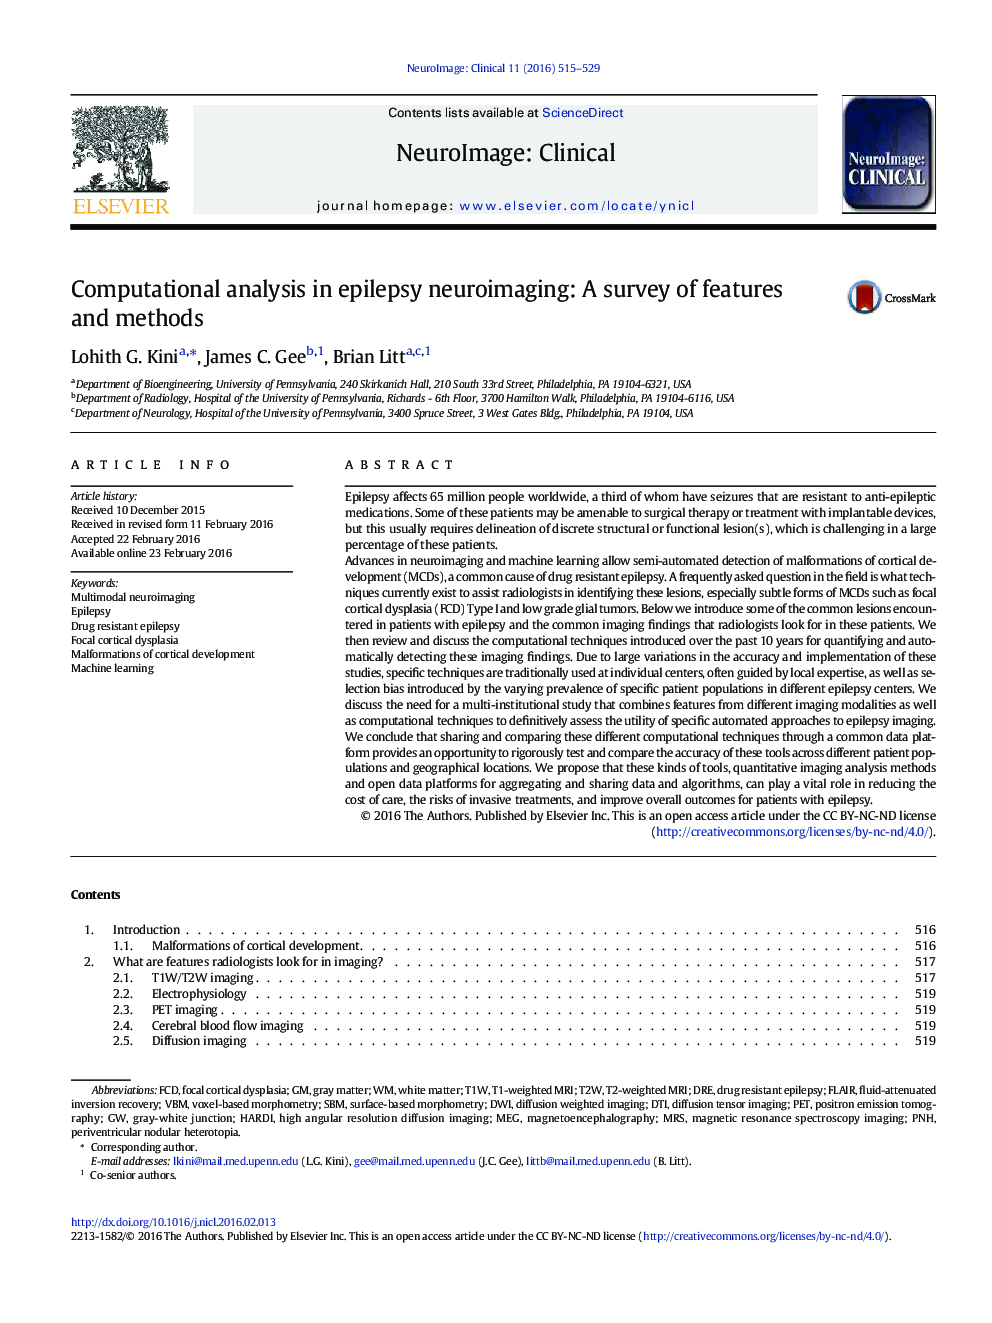 Computational analysis in epilepsy neuroimaging: A survey of features and methods